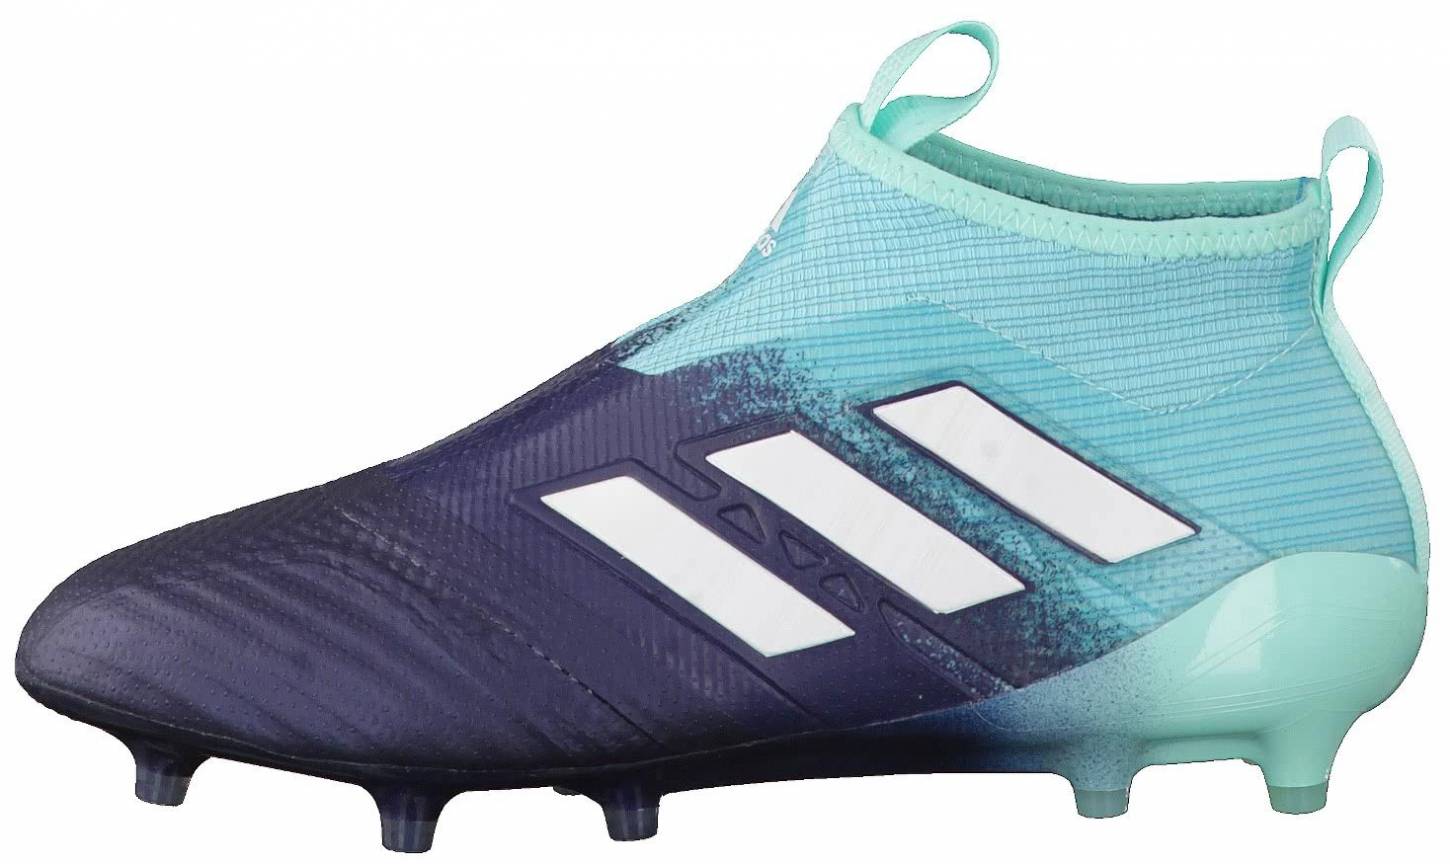 adidas football shoes without laces